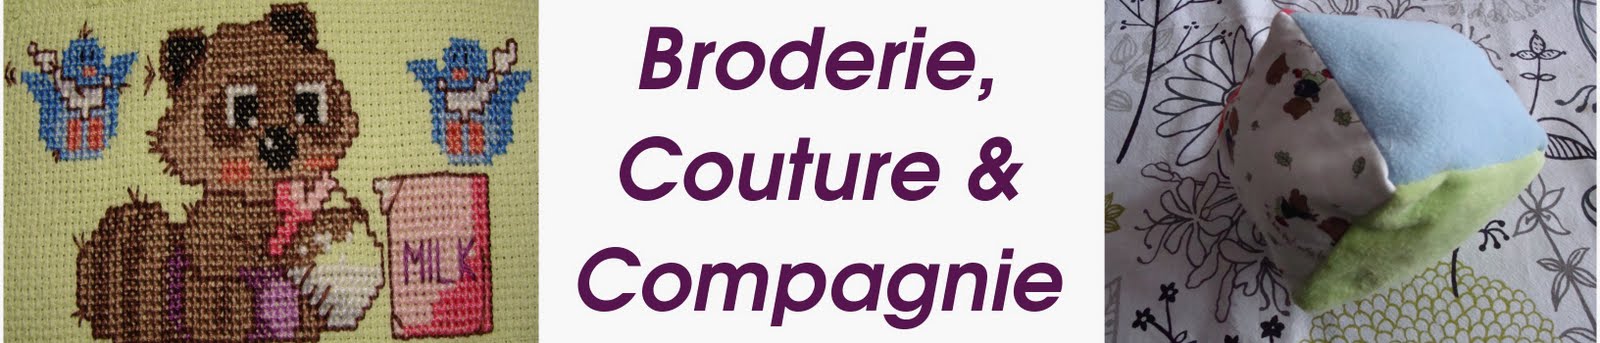 Broderie, couture et compagnie